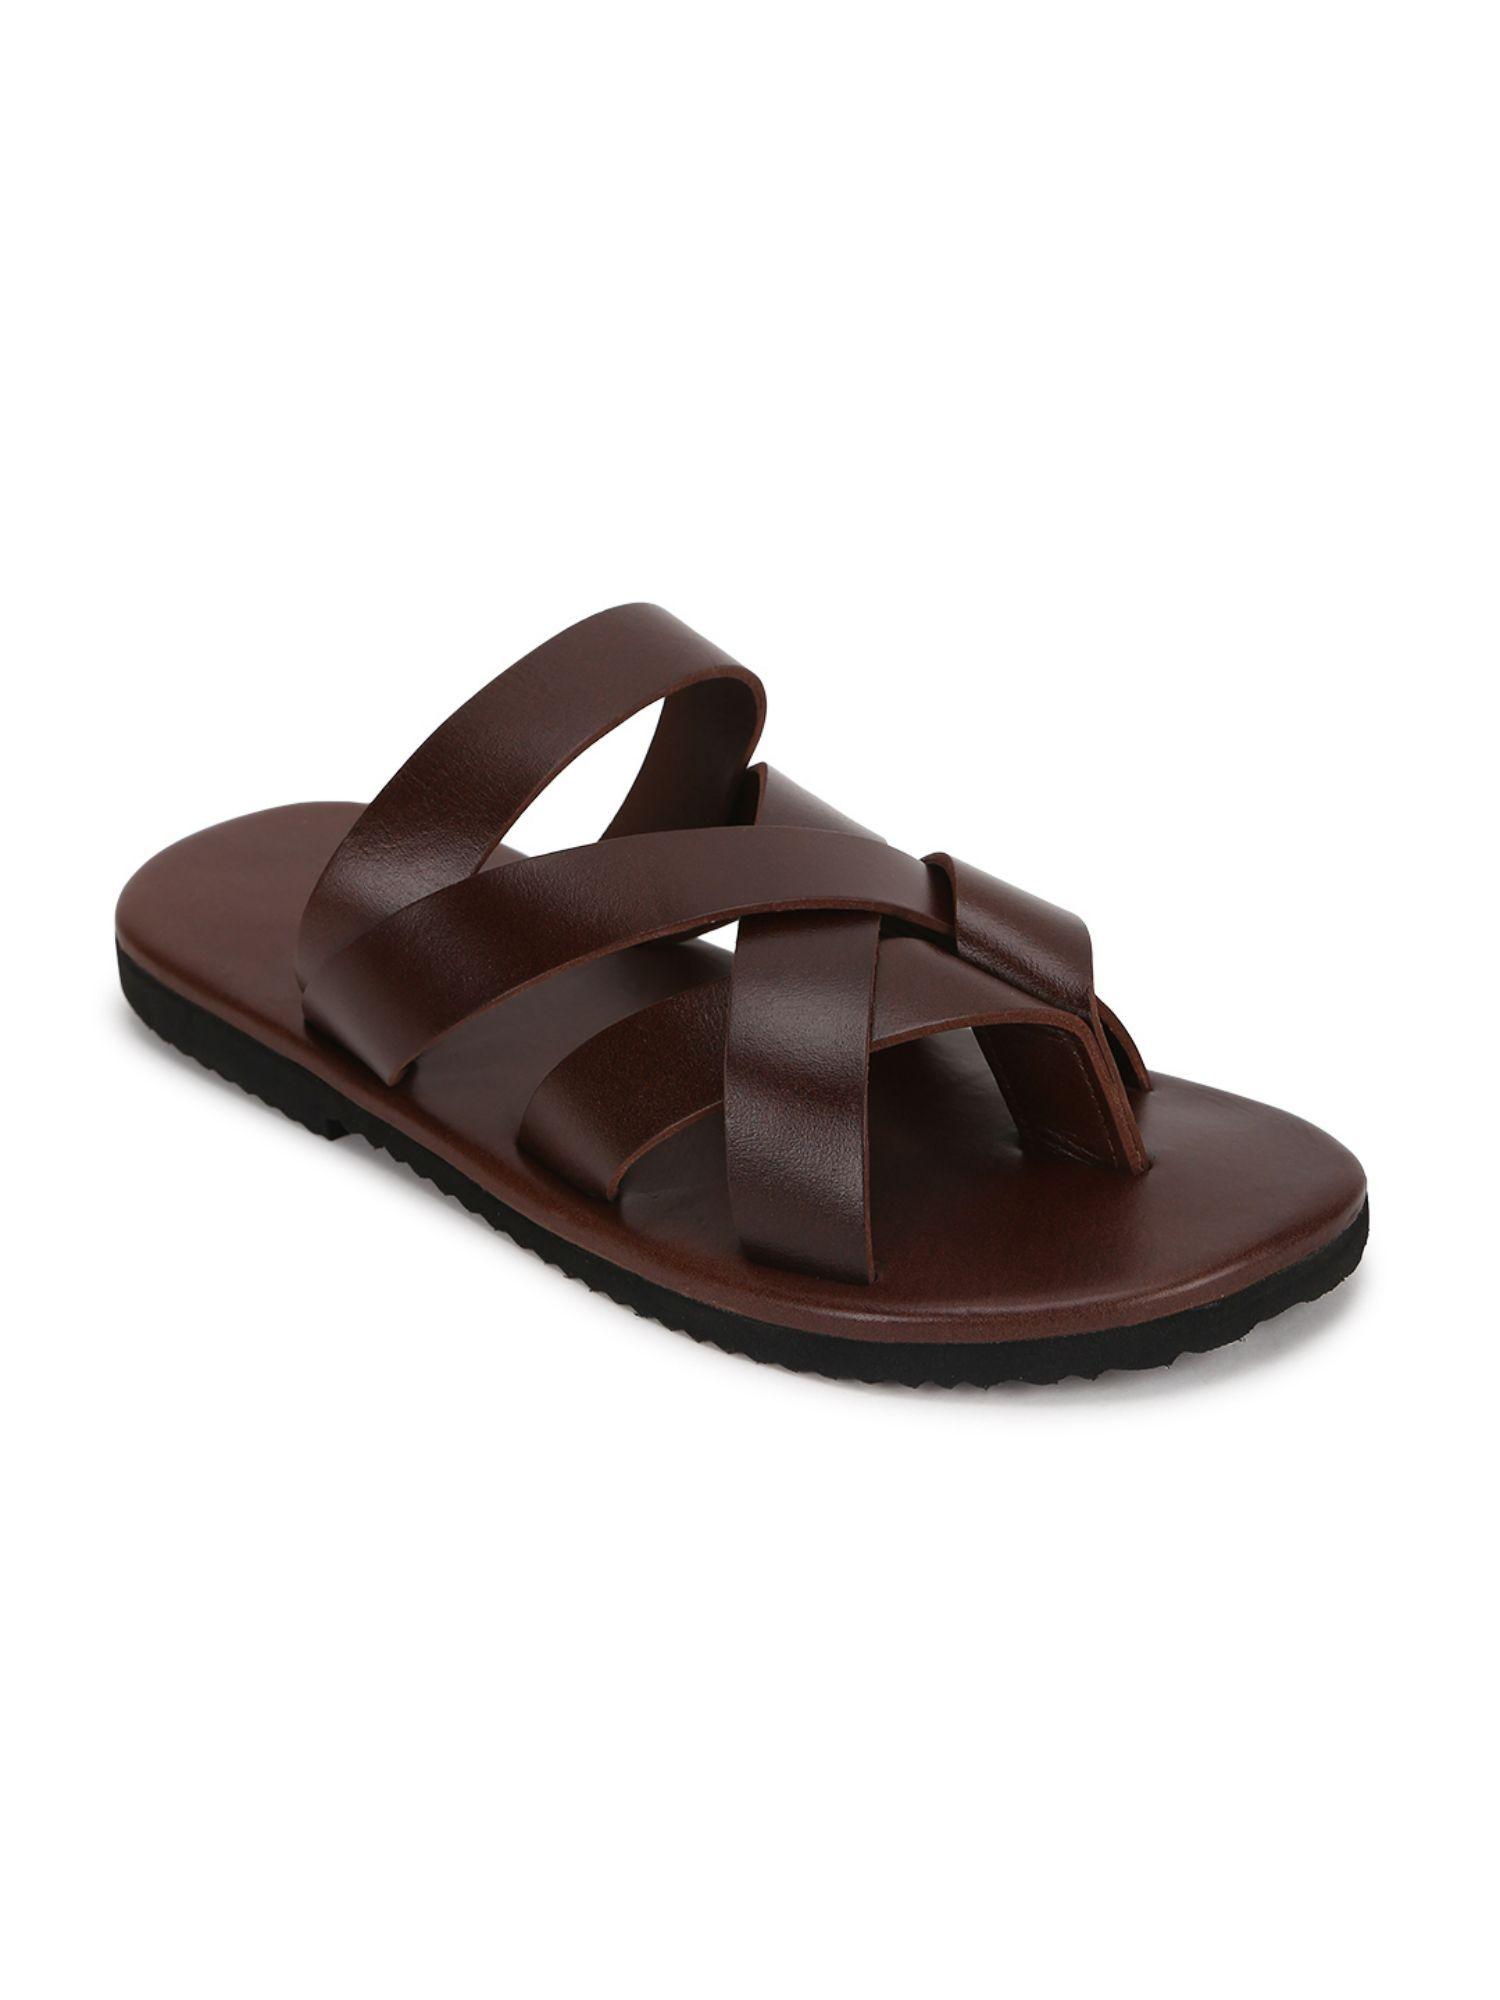 brown-leather-solid-plain-flipflops